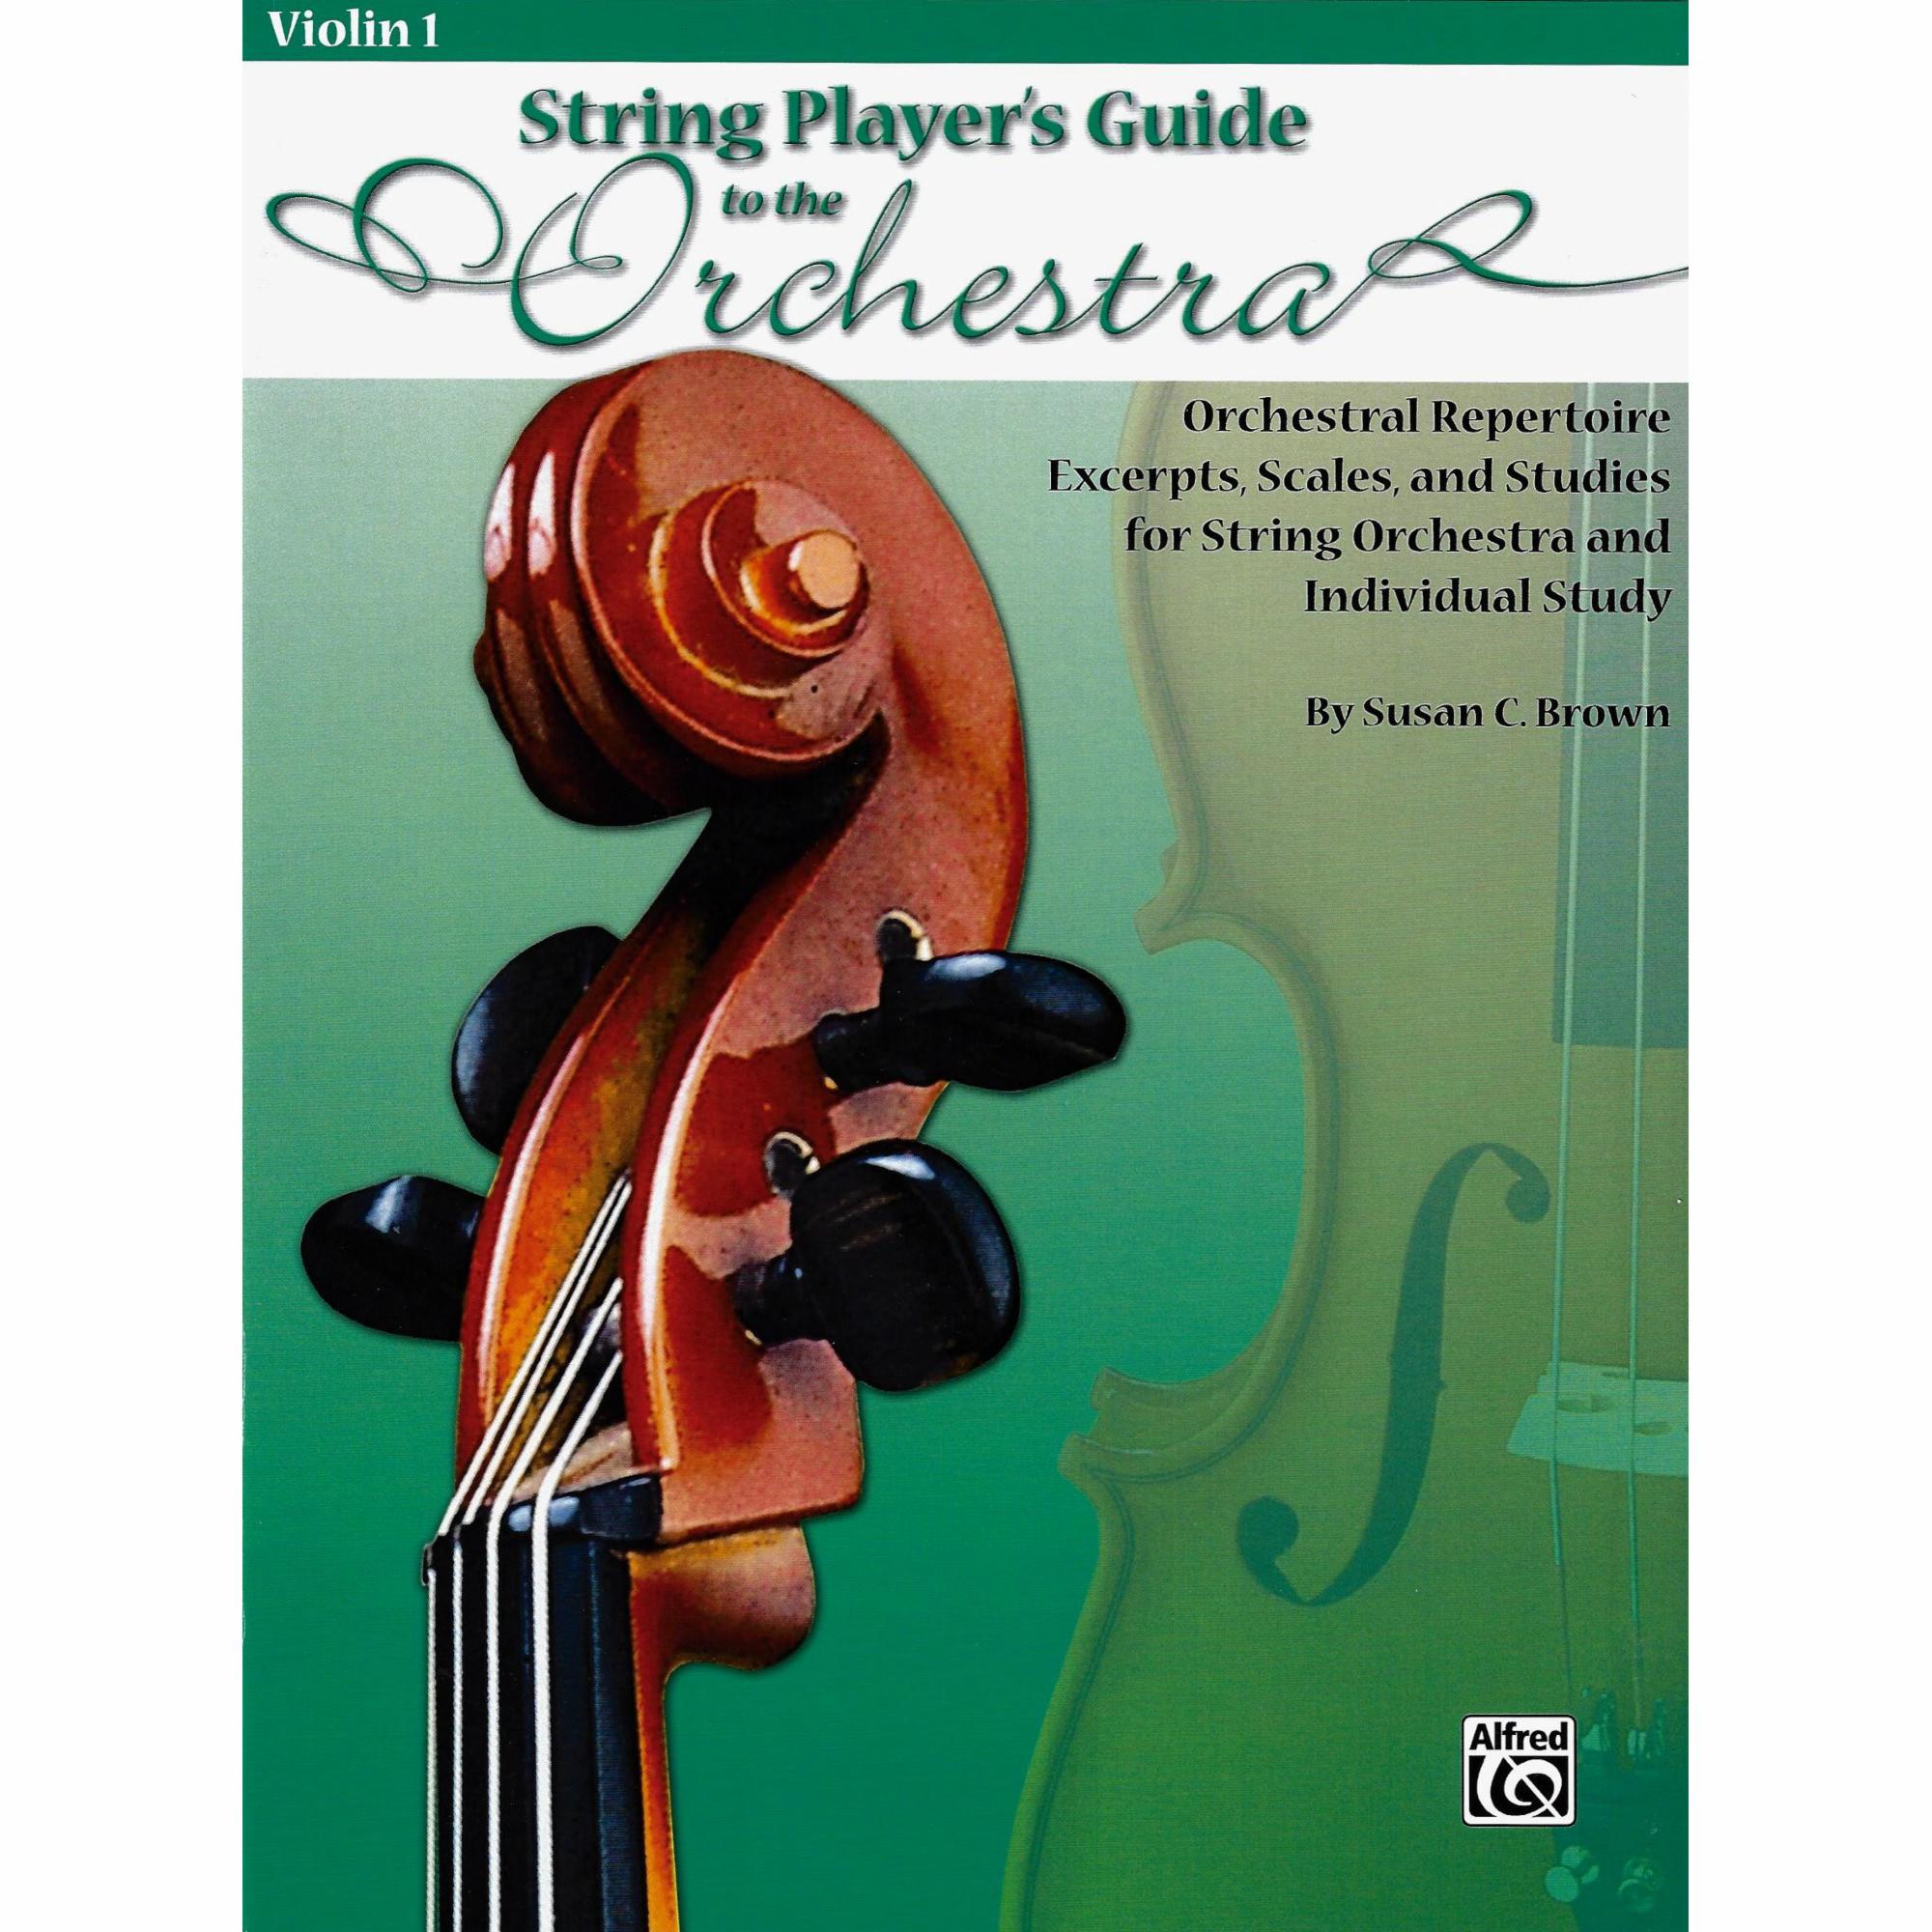 String Player's Guide to the Orchestra